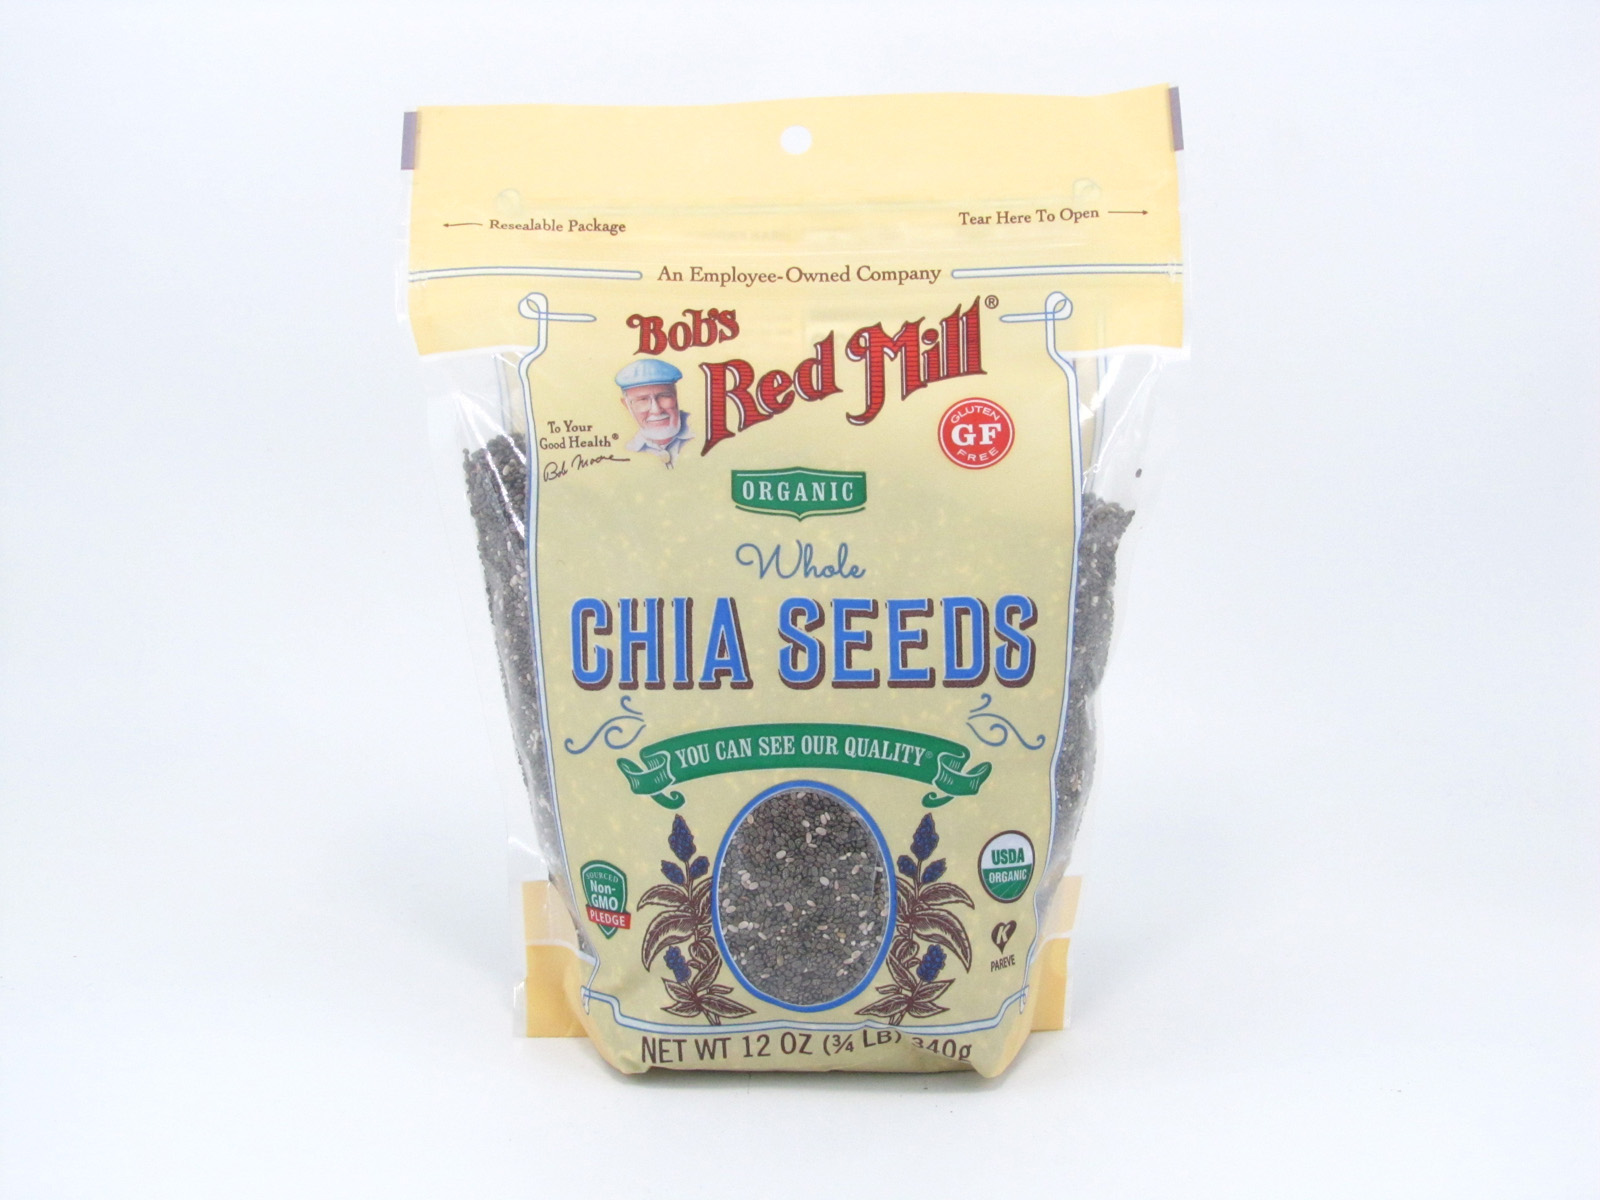 Bob's Red Mill - Chia Seeds - front view